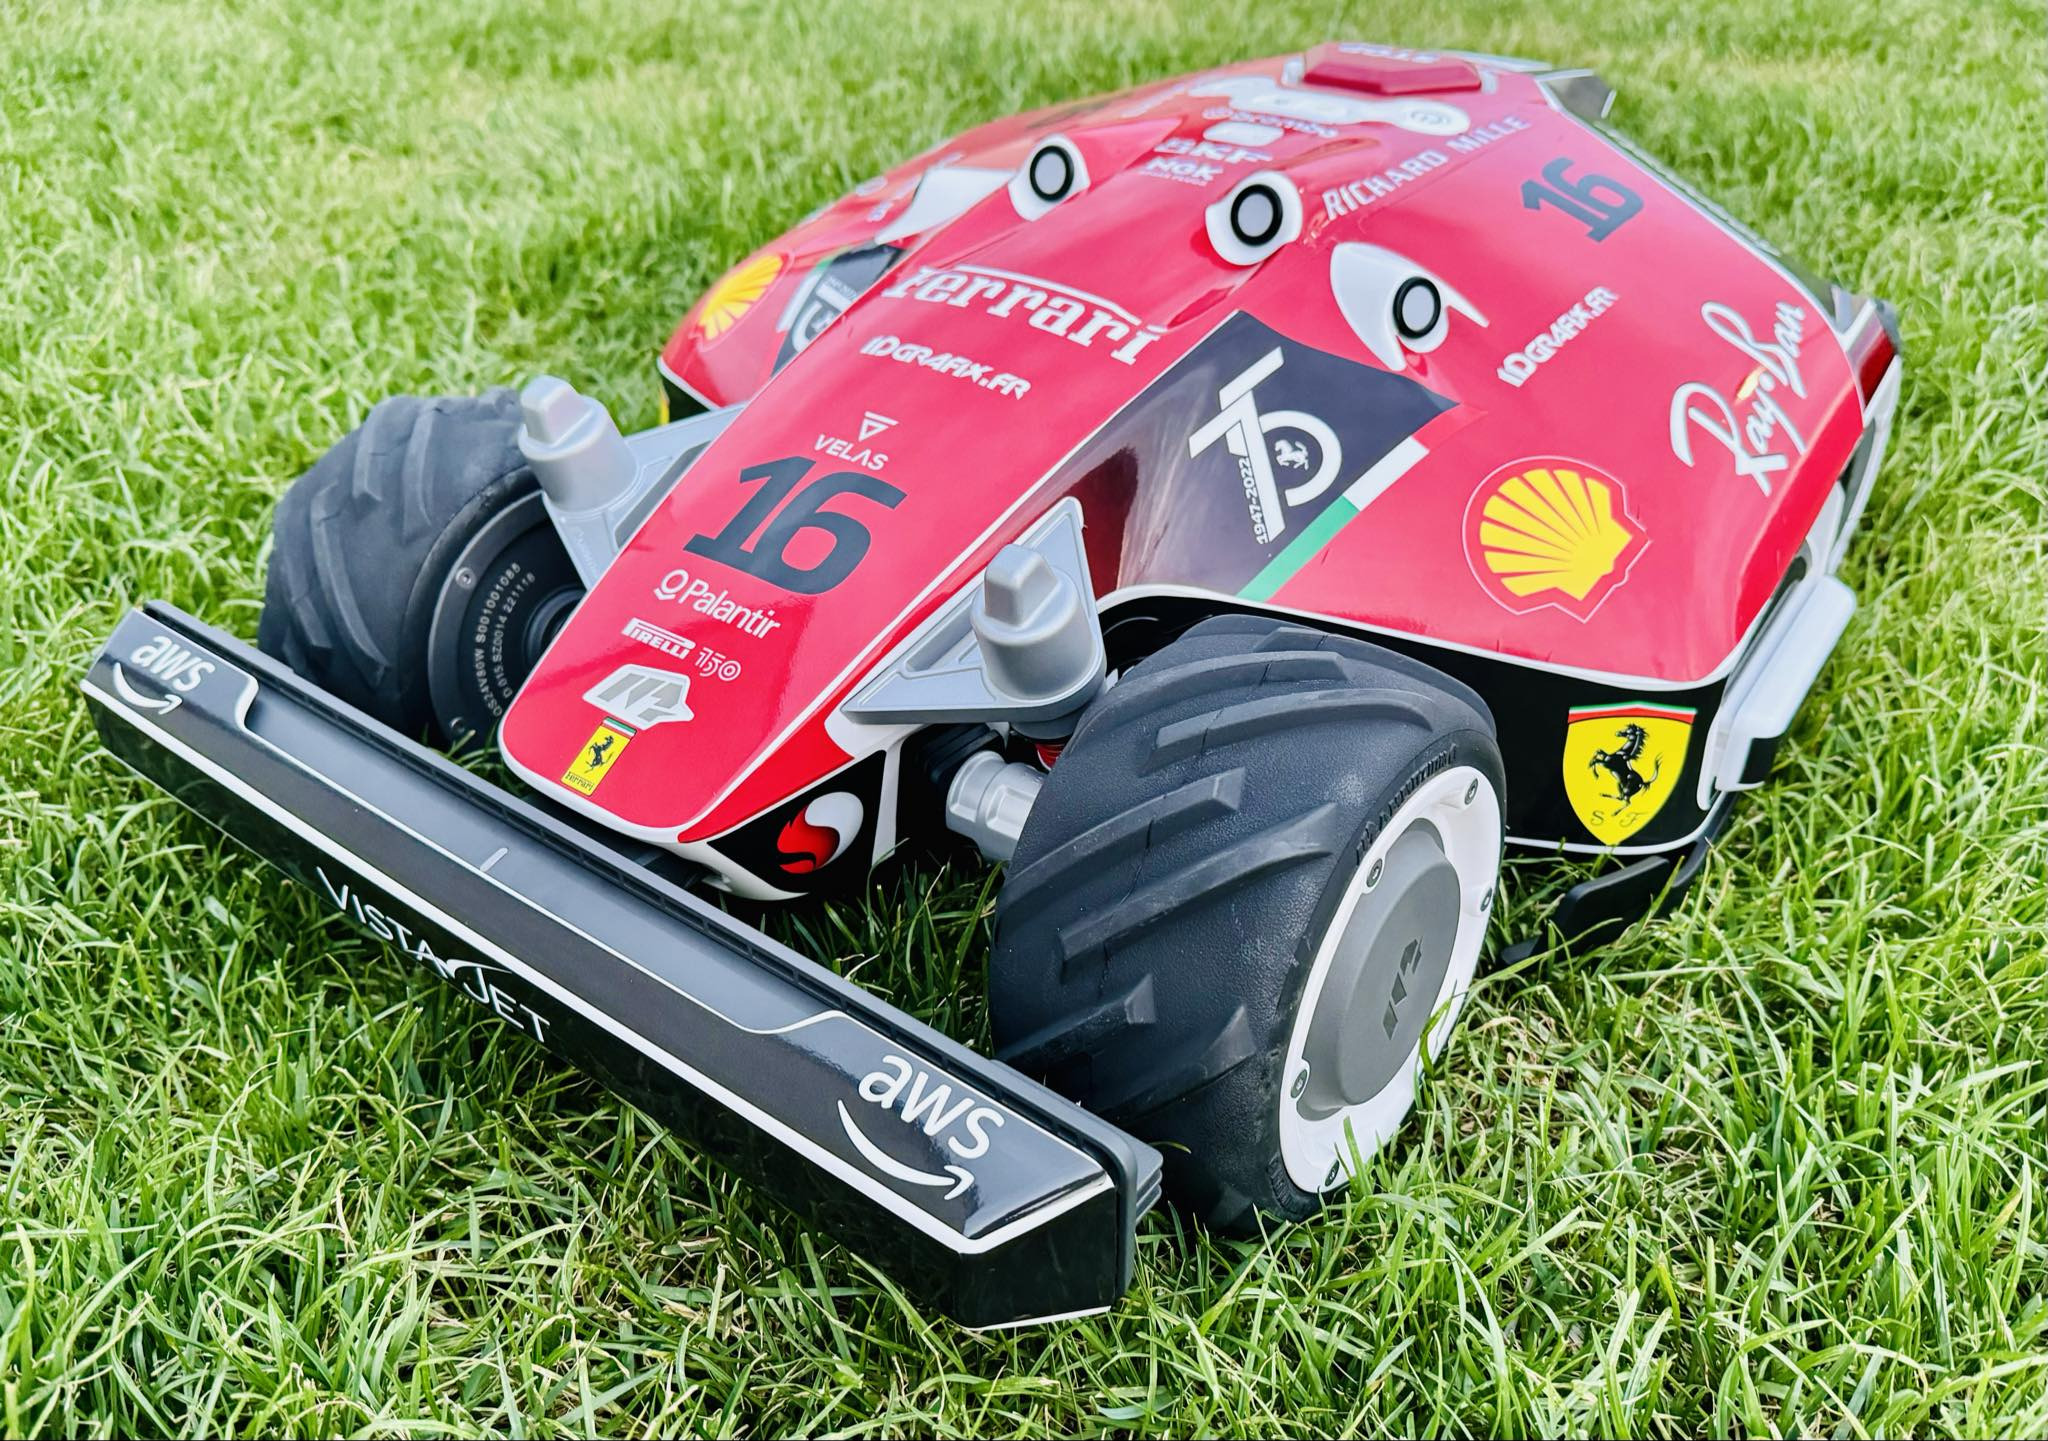 NEWS - Sticker kit for Mammotion LUBA 1 robotic lawnmower are available